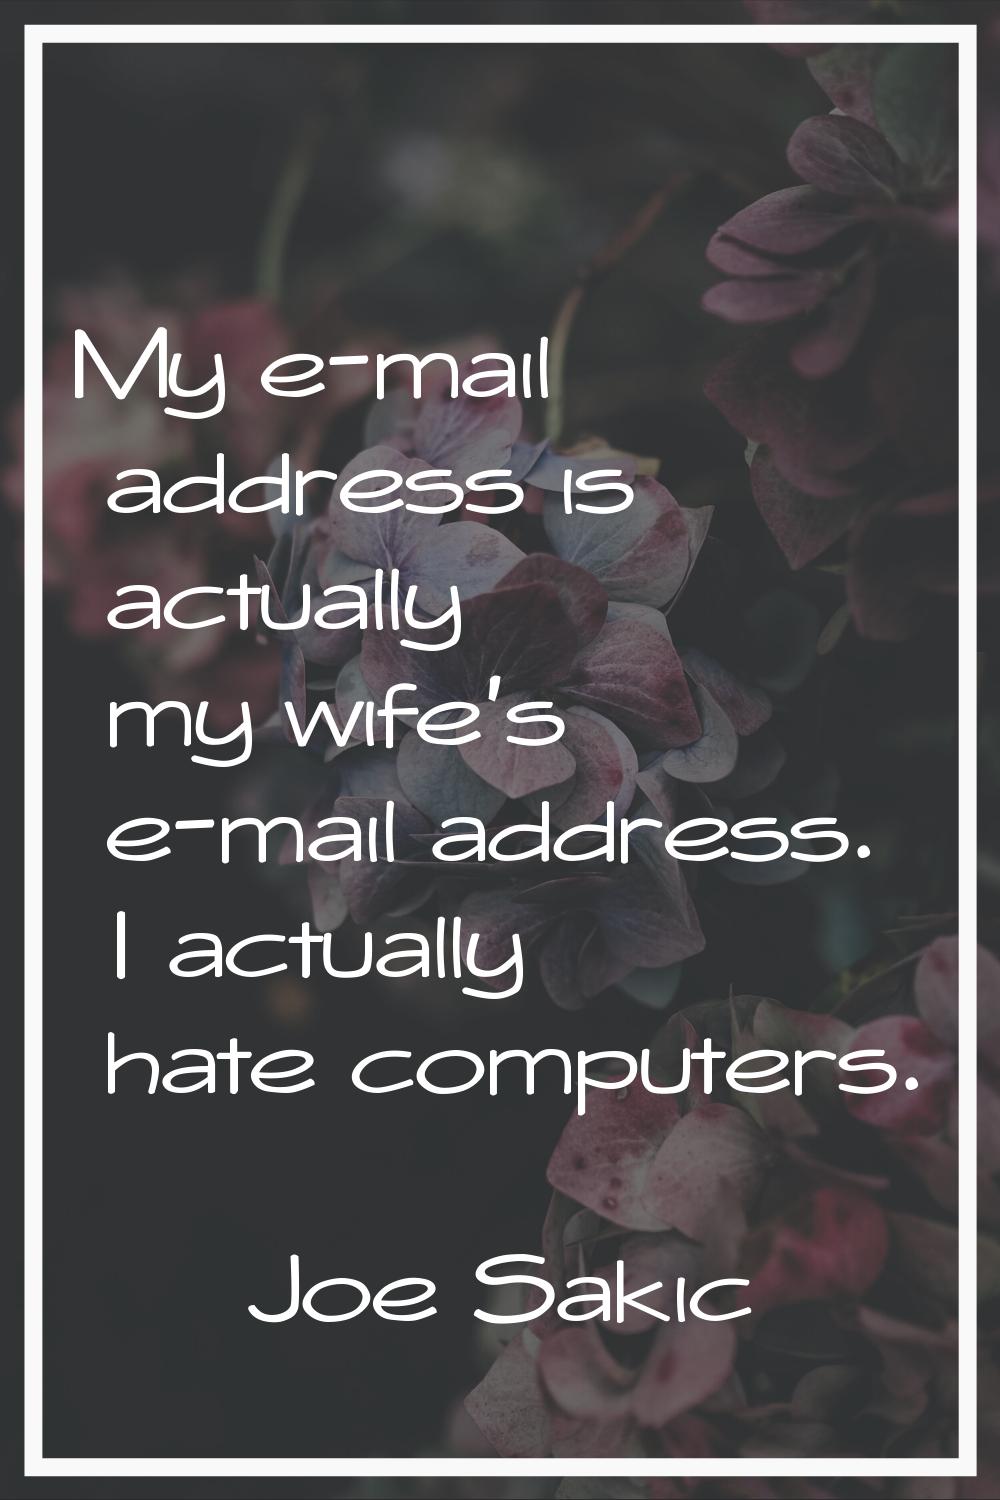 My e-mail address is actually my wife's e-mail address. I actually hate computers.